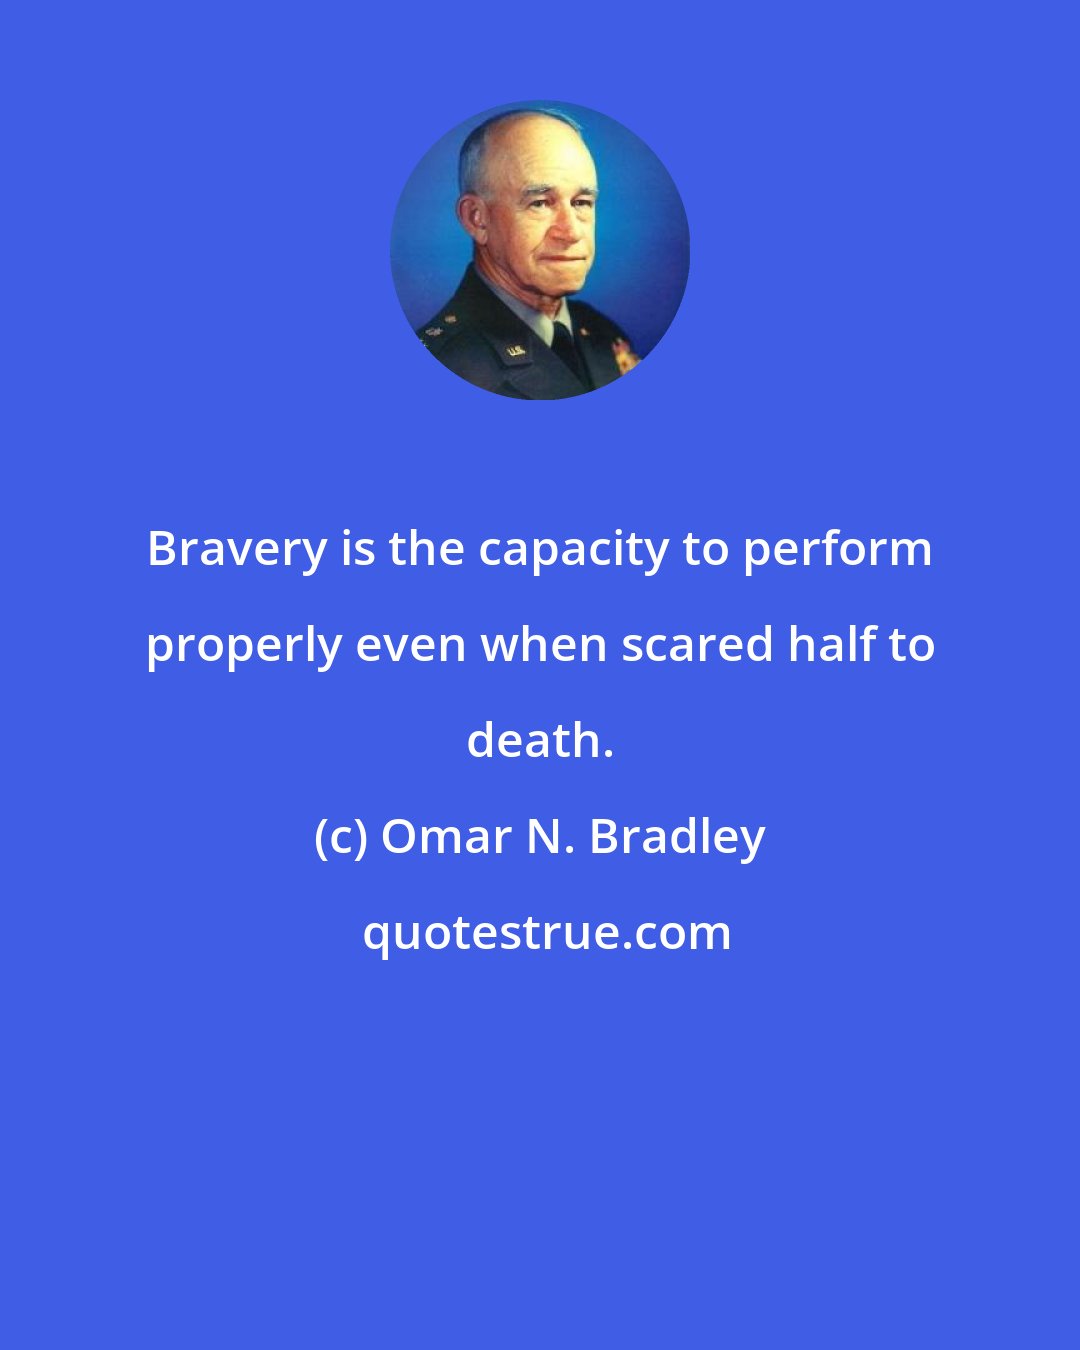 Omar N. Bradley: Bravery is the capacity to perform properly even when scared half to death.